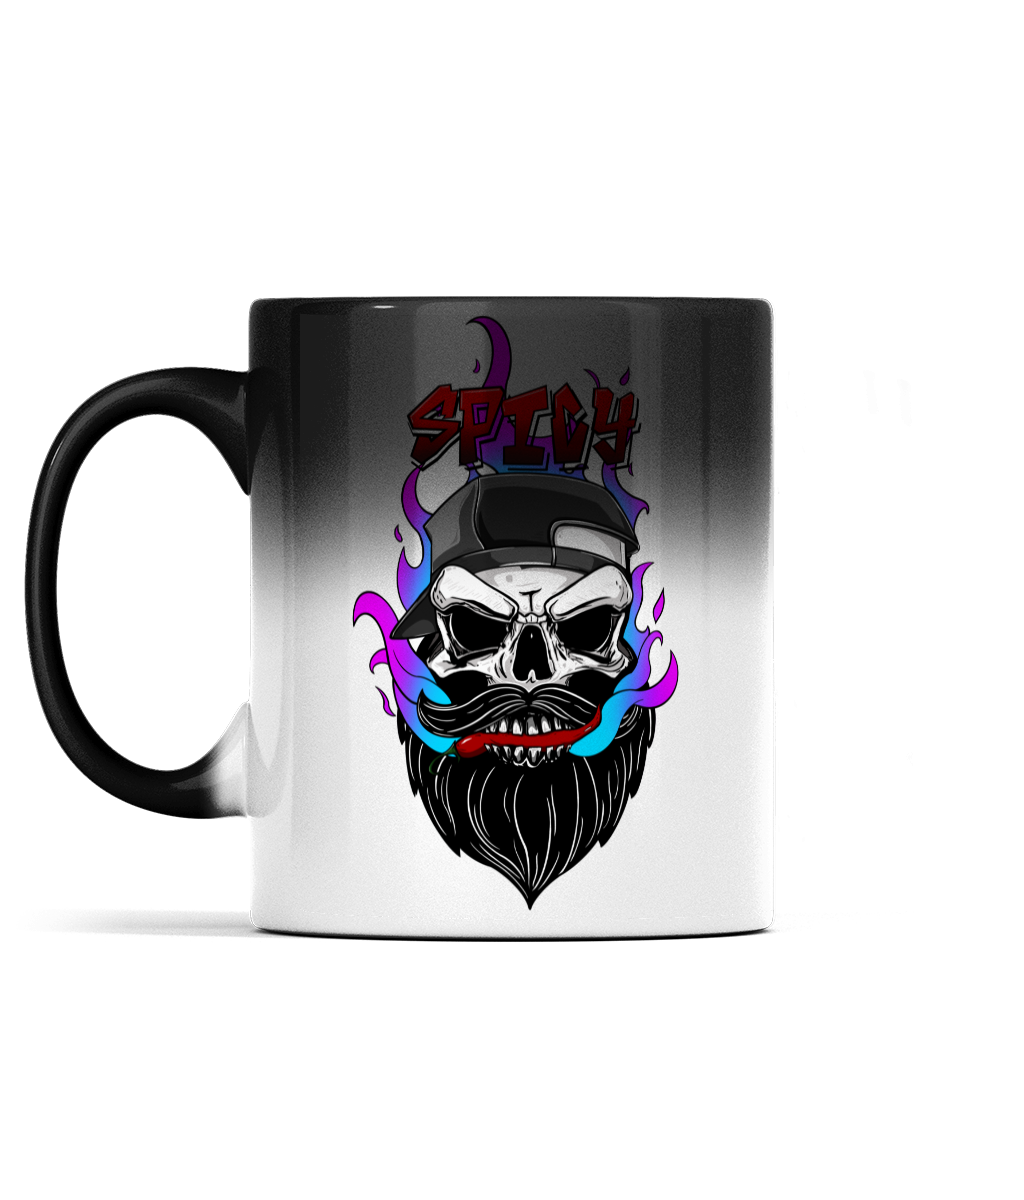 The Bropher's Grimm Spicy 11oz Black Magic Colour Changing Reveal Mug